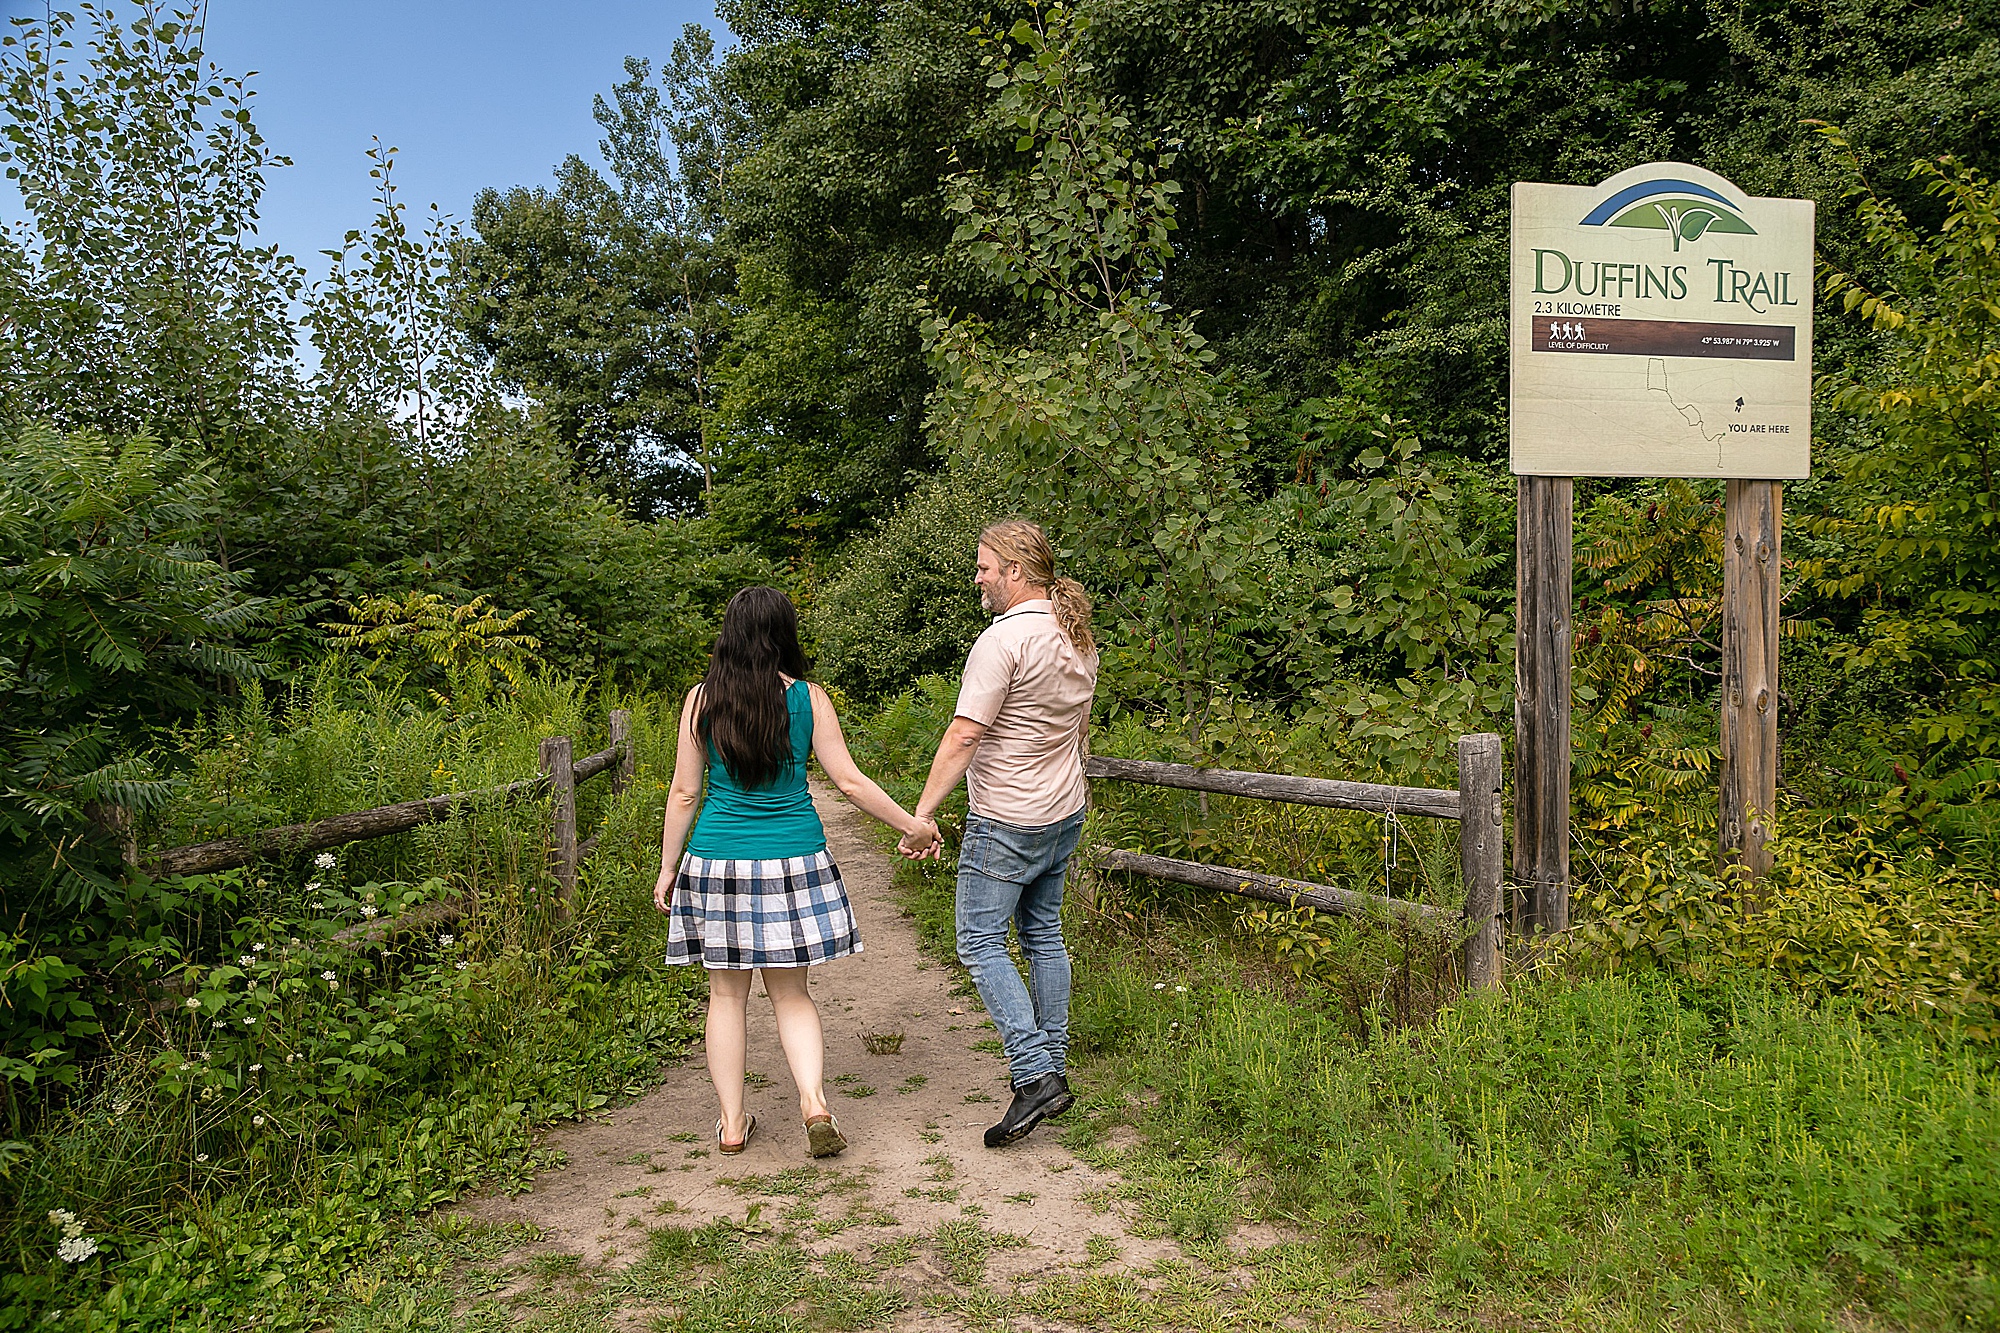 duffin's trail entrance at greenwood conservation area